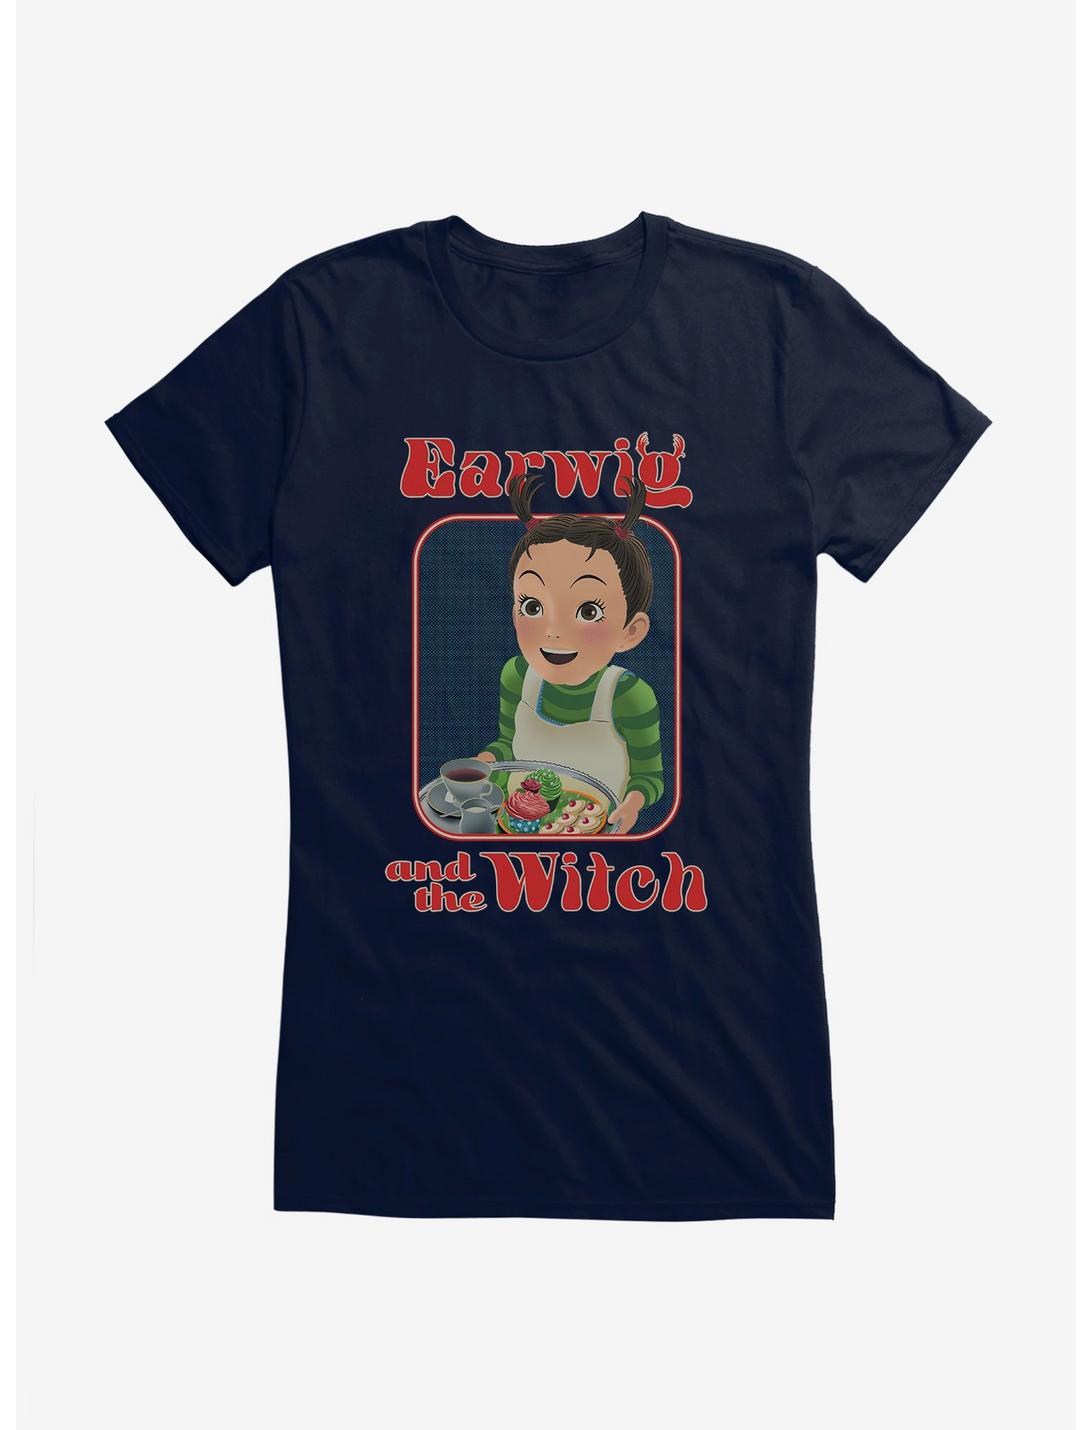 Studio Ghibli Earwig And The Witch Served Girls T-Shirt, NAVY, hi-res